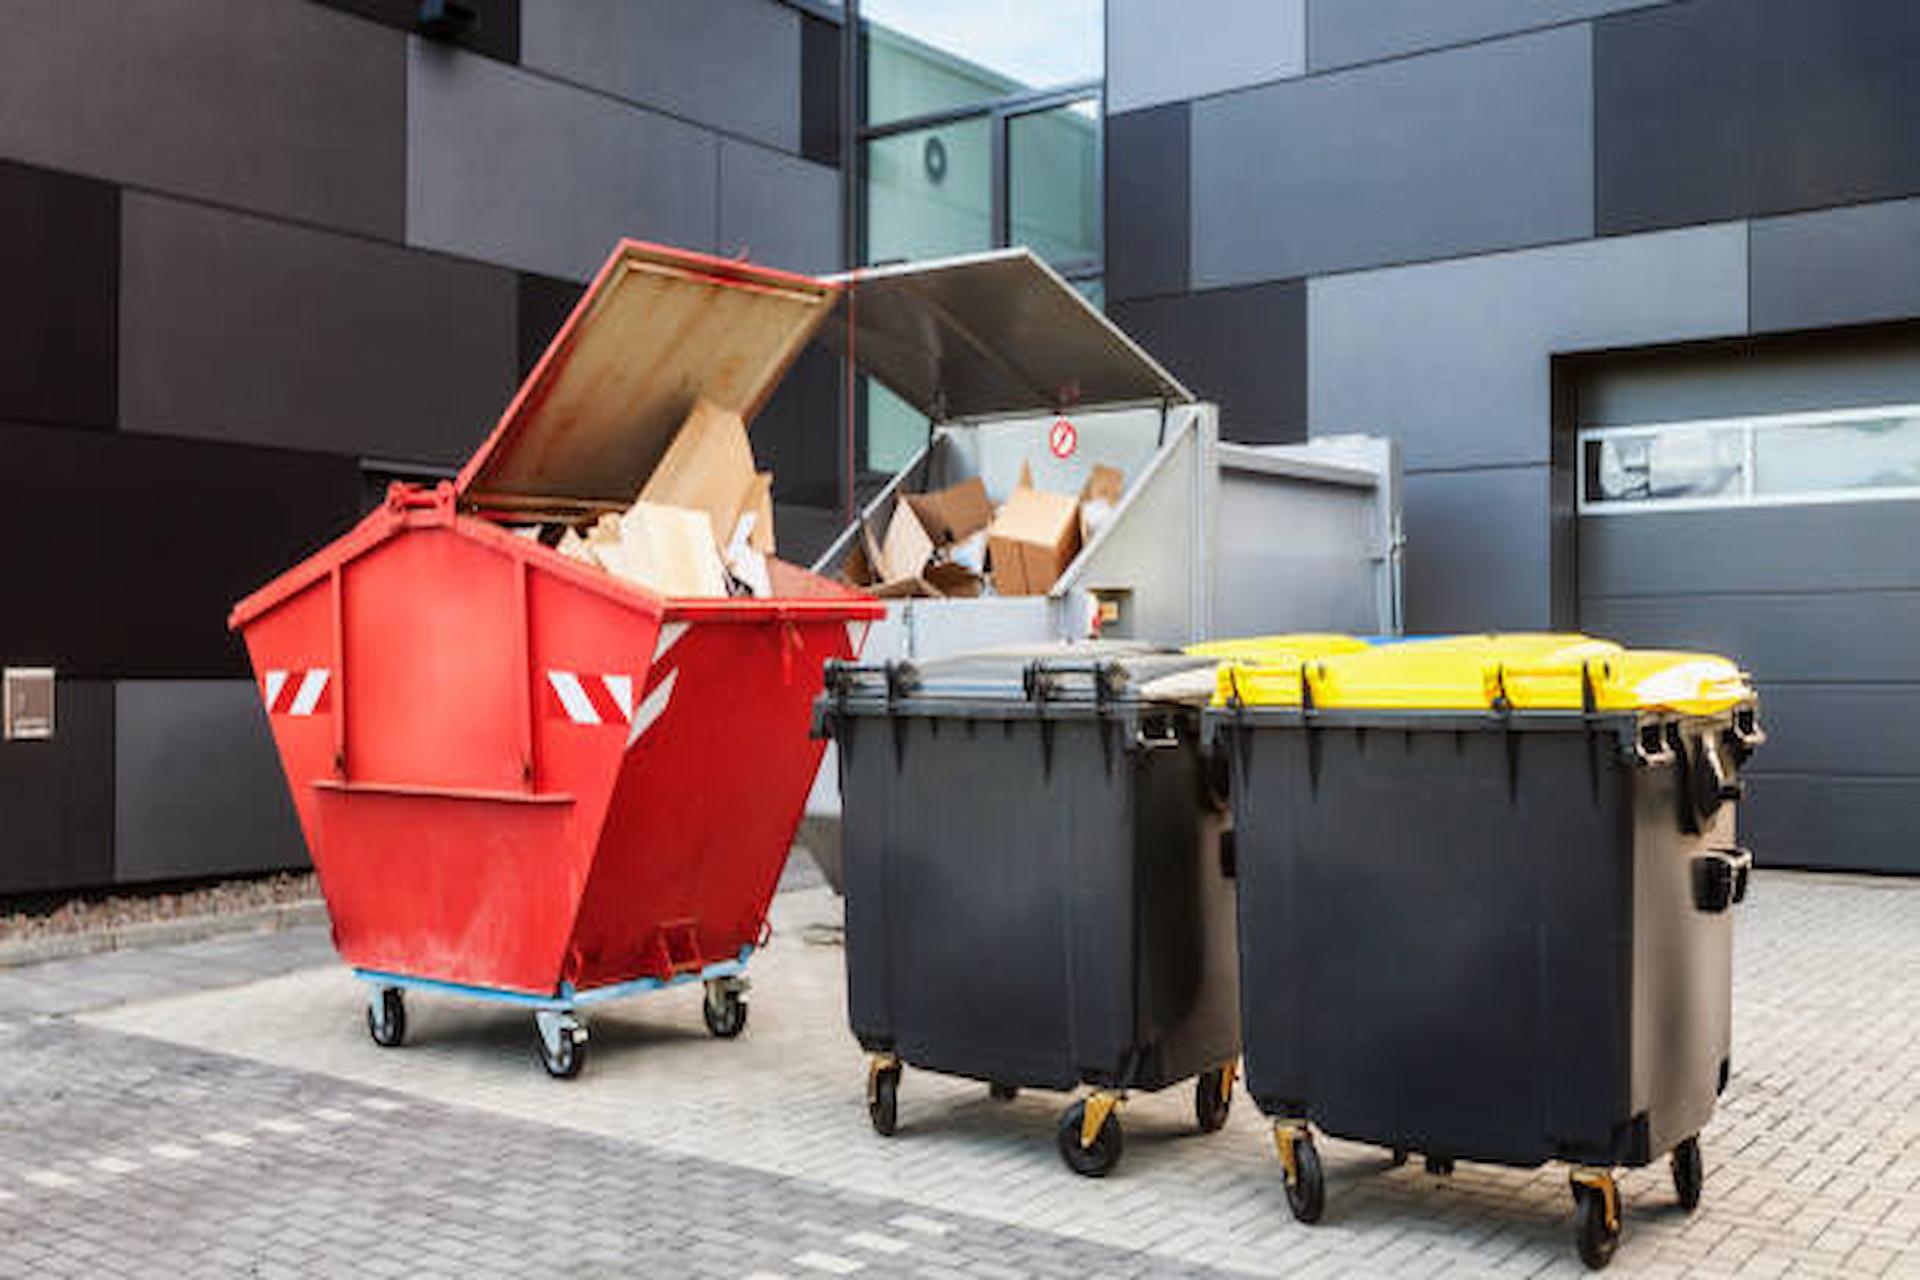 What Should You Consider When Disposing Wastes From Your Home?